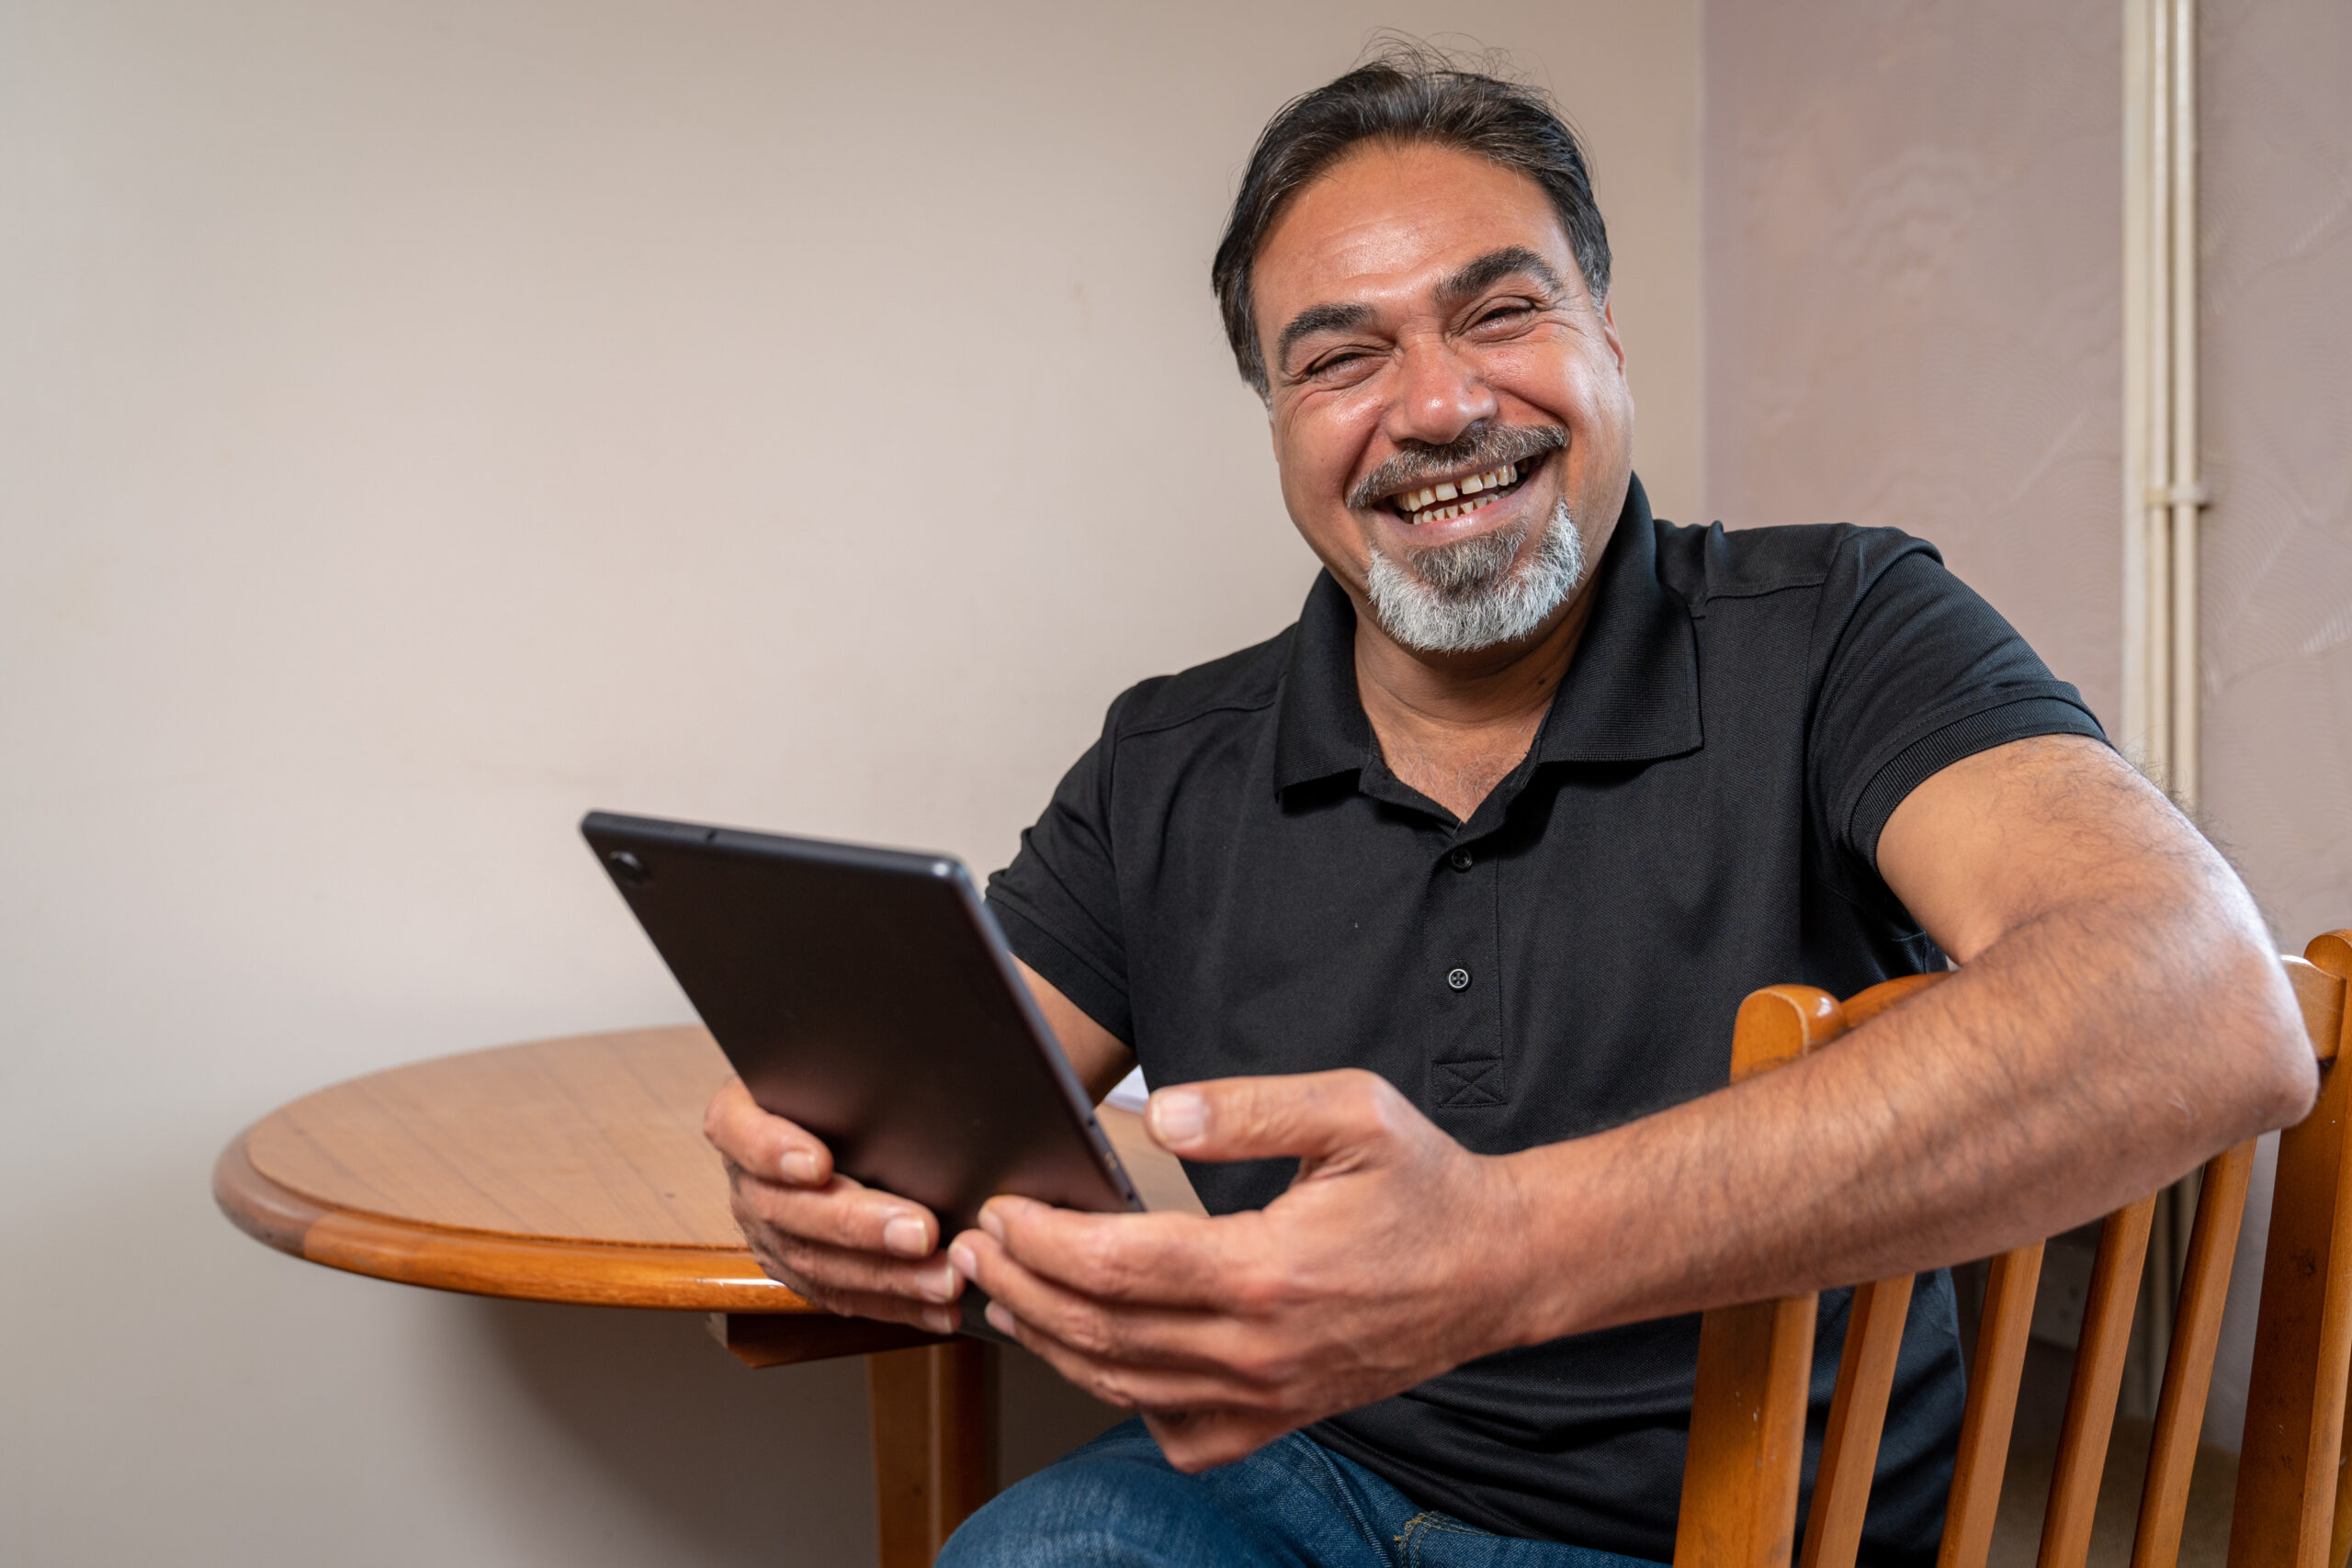 A photograph of Faris Abedalakhwa. He is sat on a chair in front of a circular table. He is smiling while holding a tablet device with both hands in front of him.